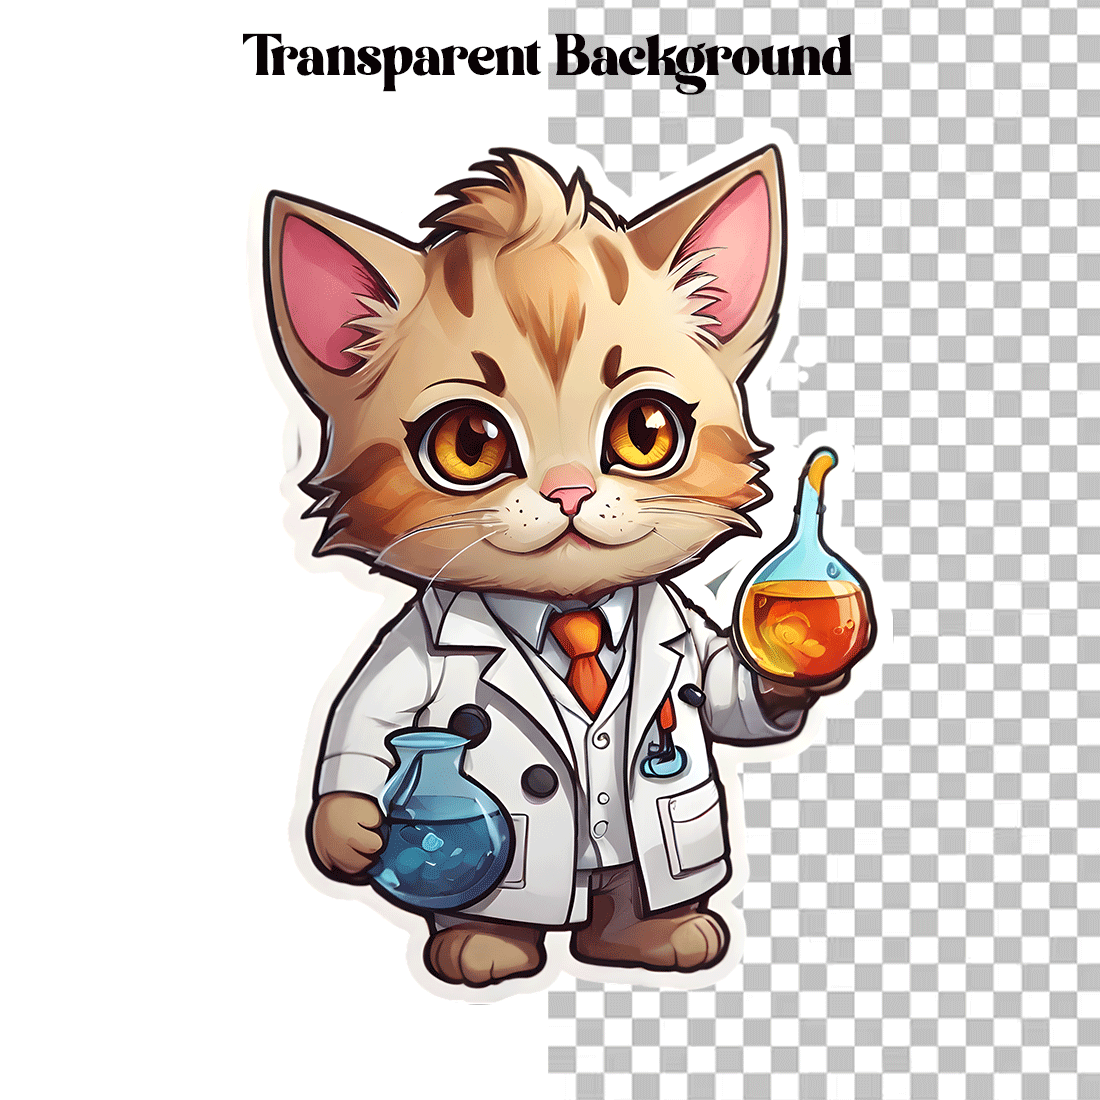 How to Draw a Cute Doctor, Cute Easy Drawings - YouTube